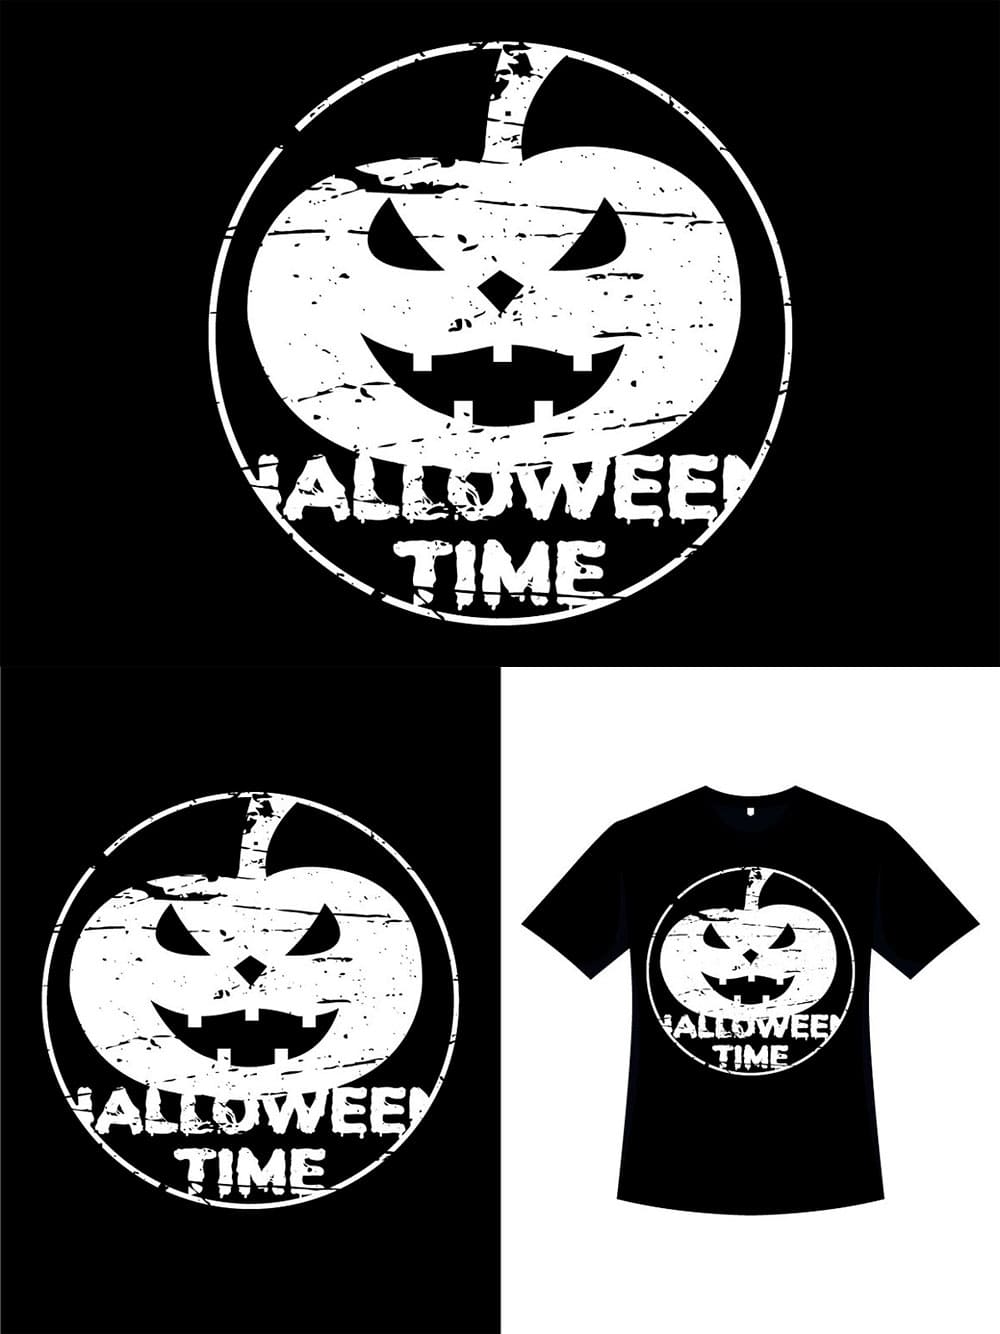 Free halloween silhouette t-shirt, picture for pinterest.